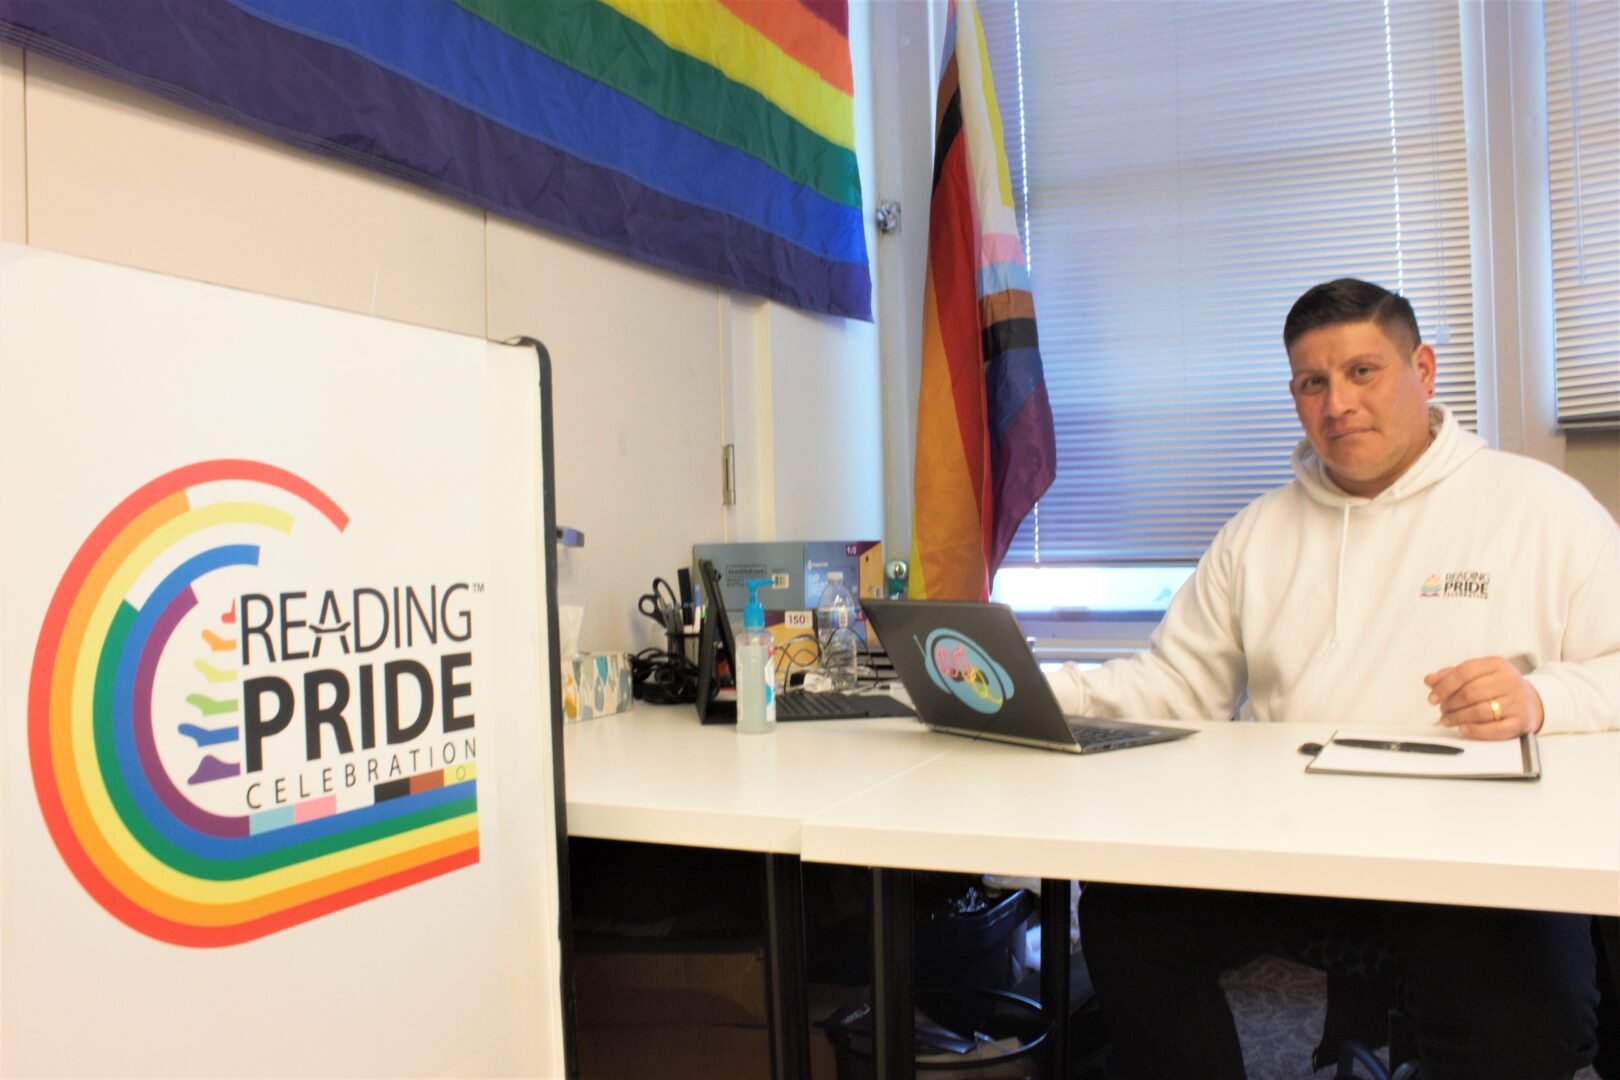 Enrique Castro is the first Latino executive director and CEO of Reading Pride Celebration.